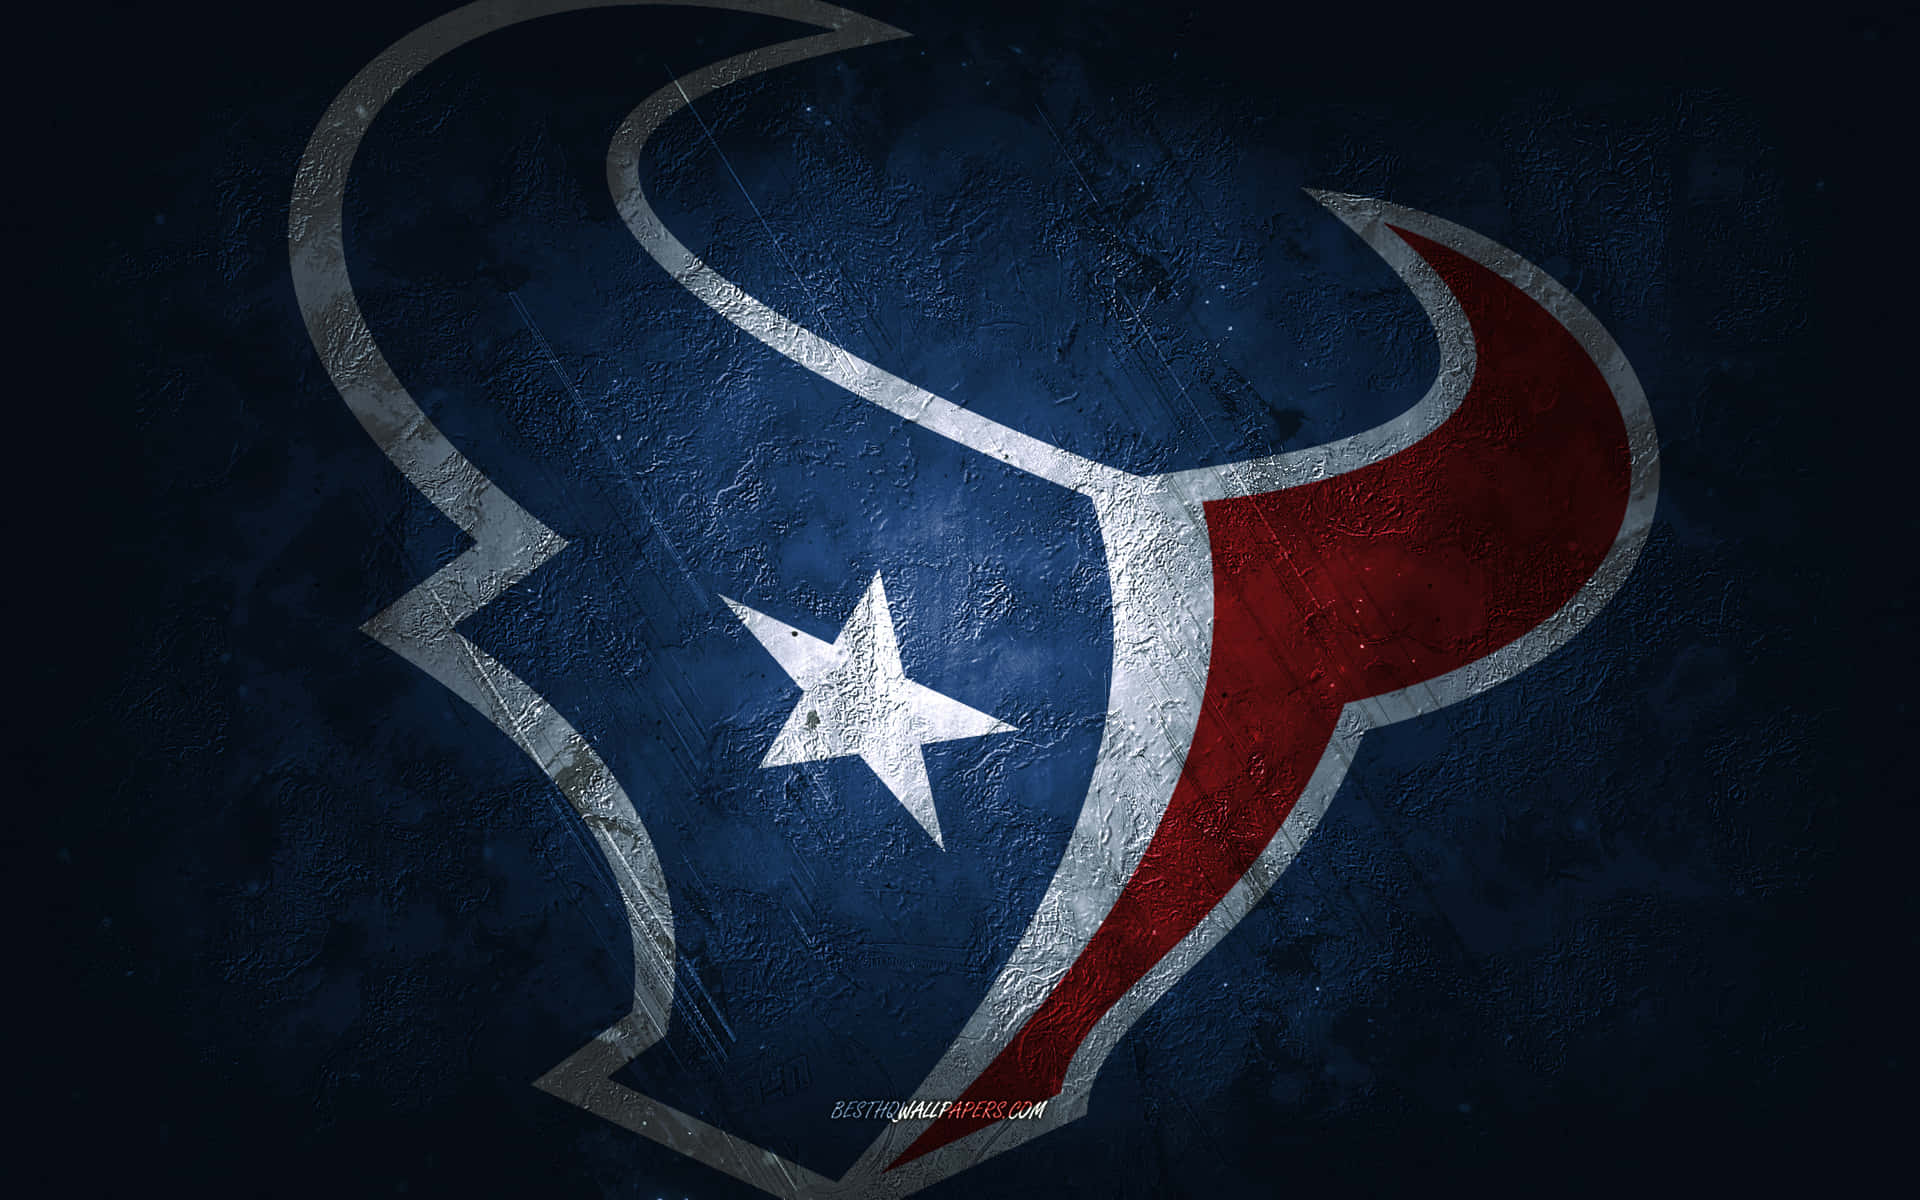 An iconic logo of the Houston Texans professional football team Wallpaper